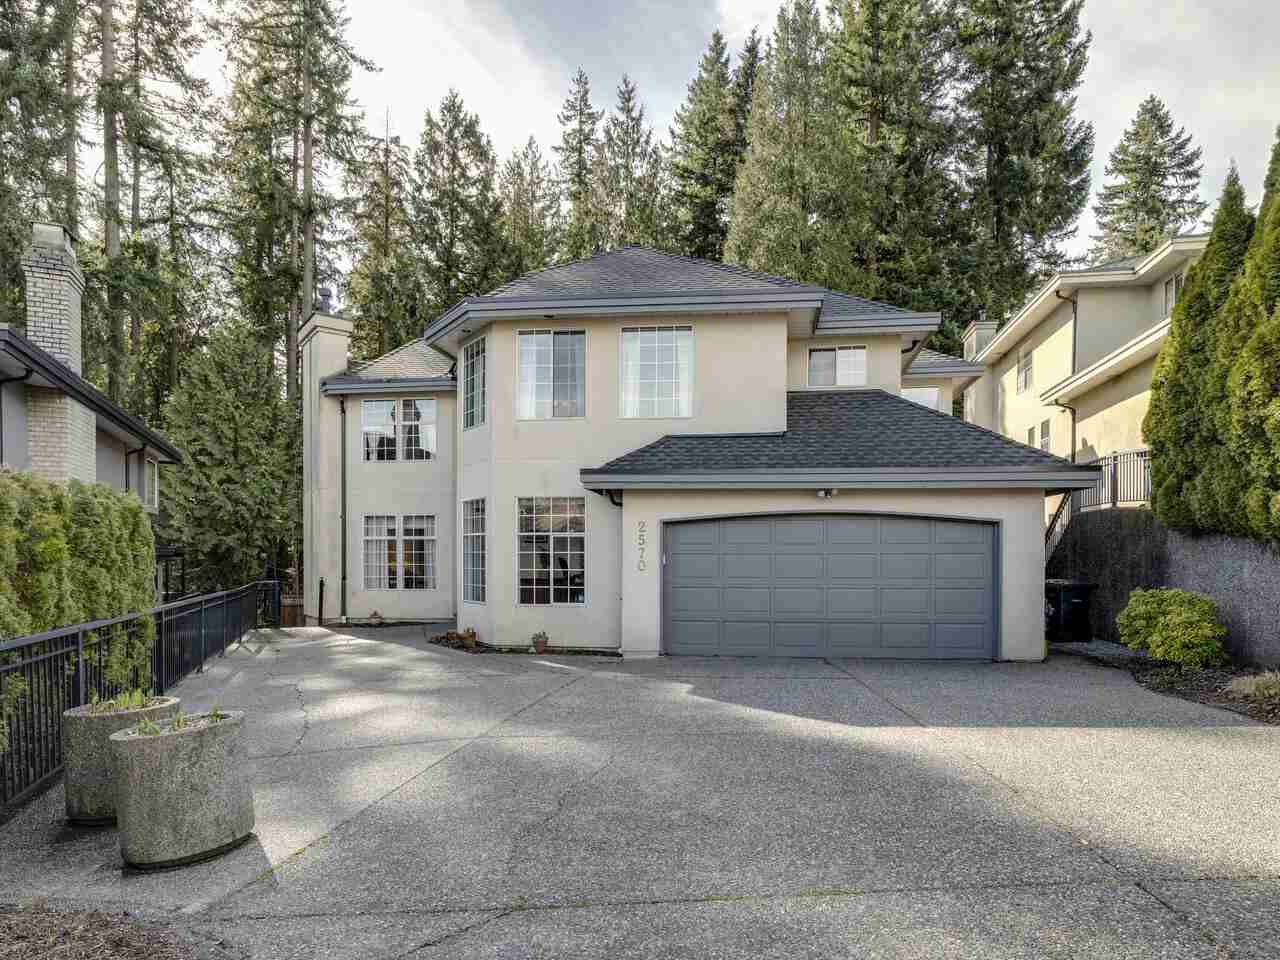 Main Photo: 2570 CRAWLEY Avenue in Coquitlam: Coquitlam East House for sale : MLS®# R2548013